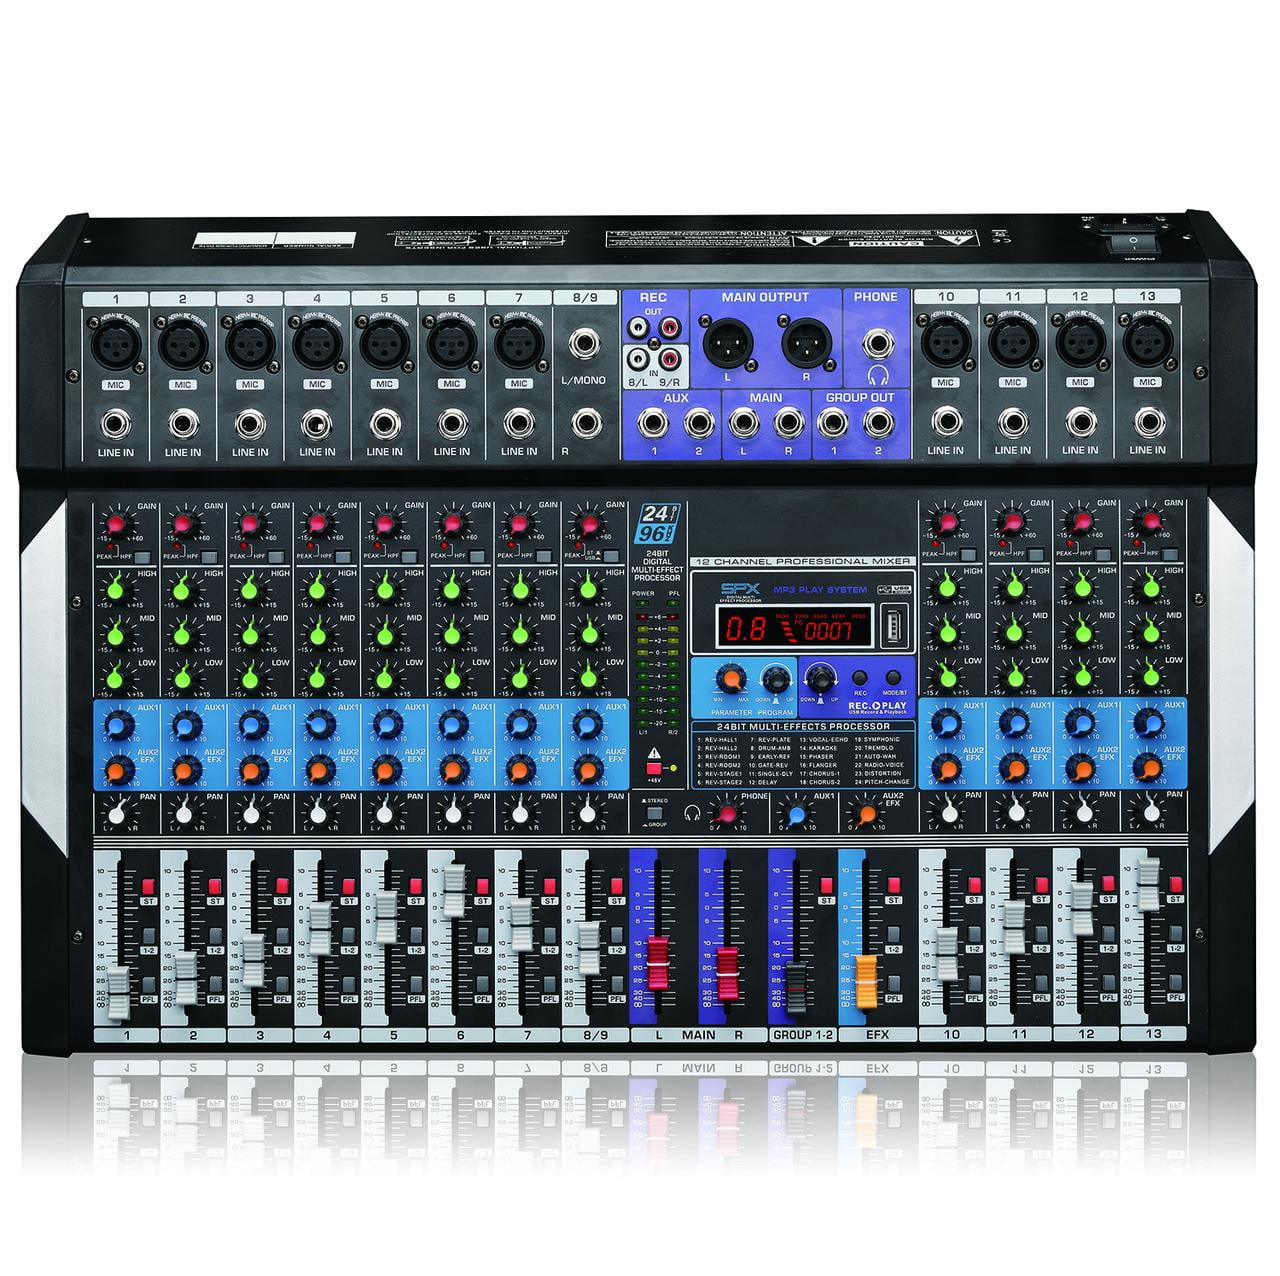 12 Channel Bluetooth Professional Powered Mixer power mixing Amplifier,DJ Sound Controller Interface w/USB Drive for PC Recording Input,48V Power 12 Channel 